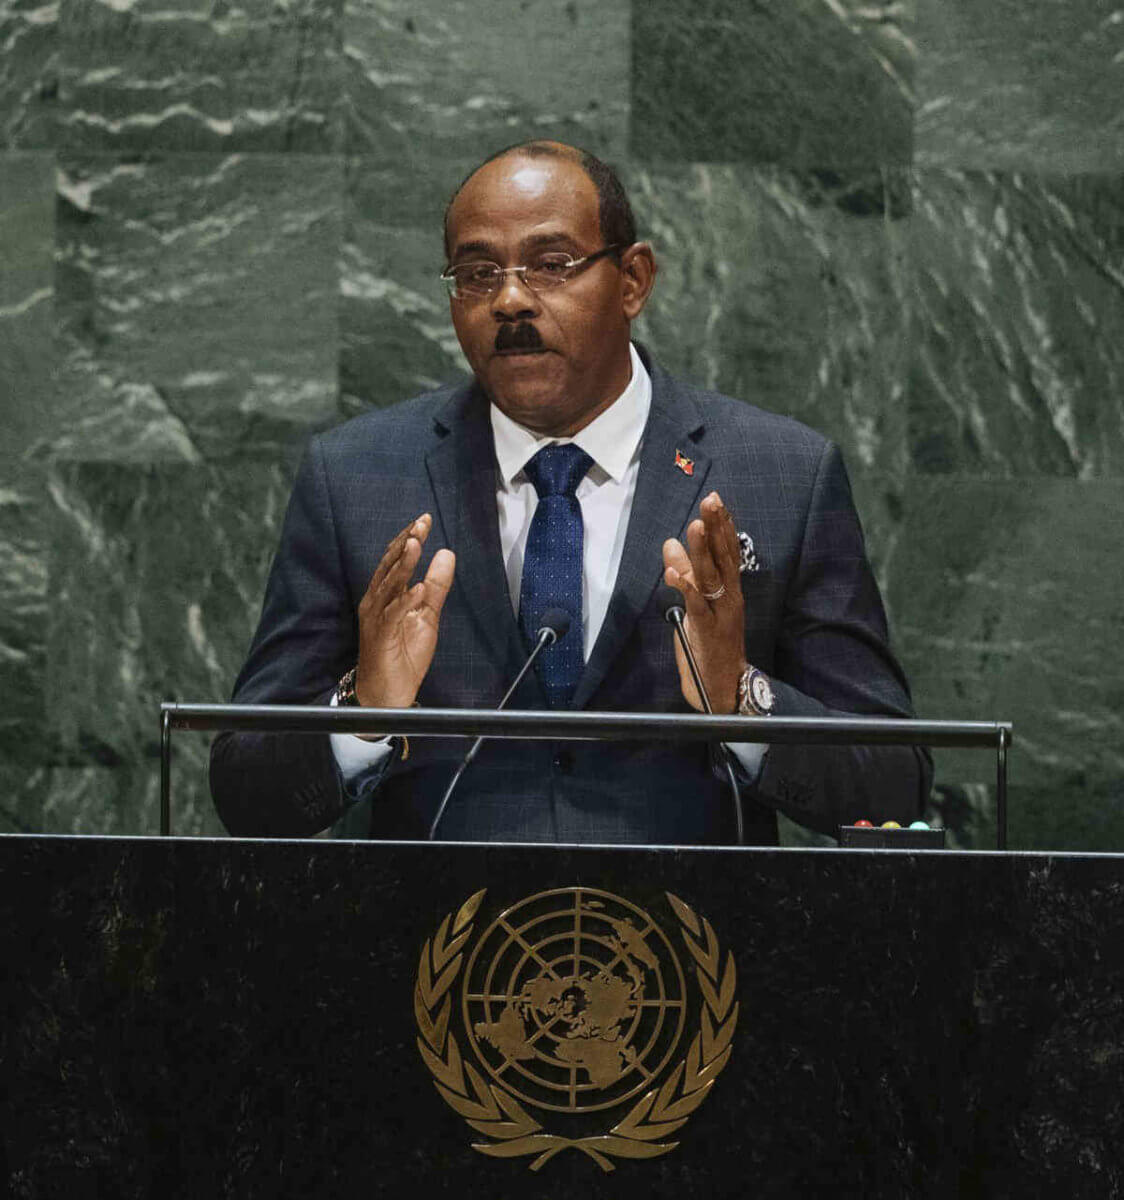 Antigua and Barbuda's Prime Minister, Gaston Alphonso Browne addresses the 74th session of the United Nations General Assembly at the U.N. headquarters Friday, Sept. 27, 2019.